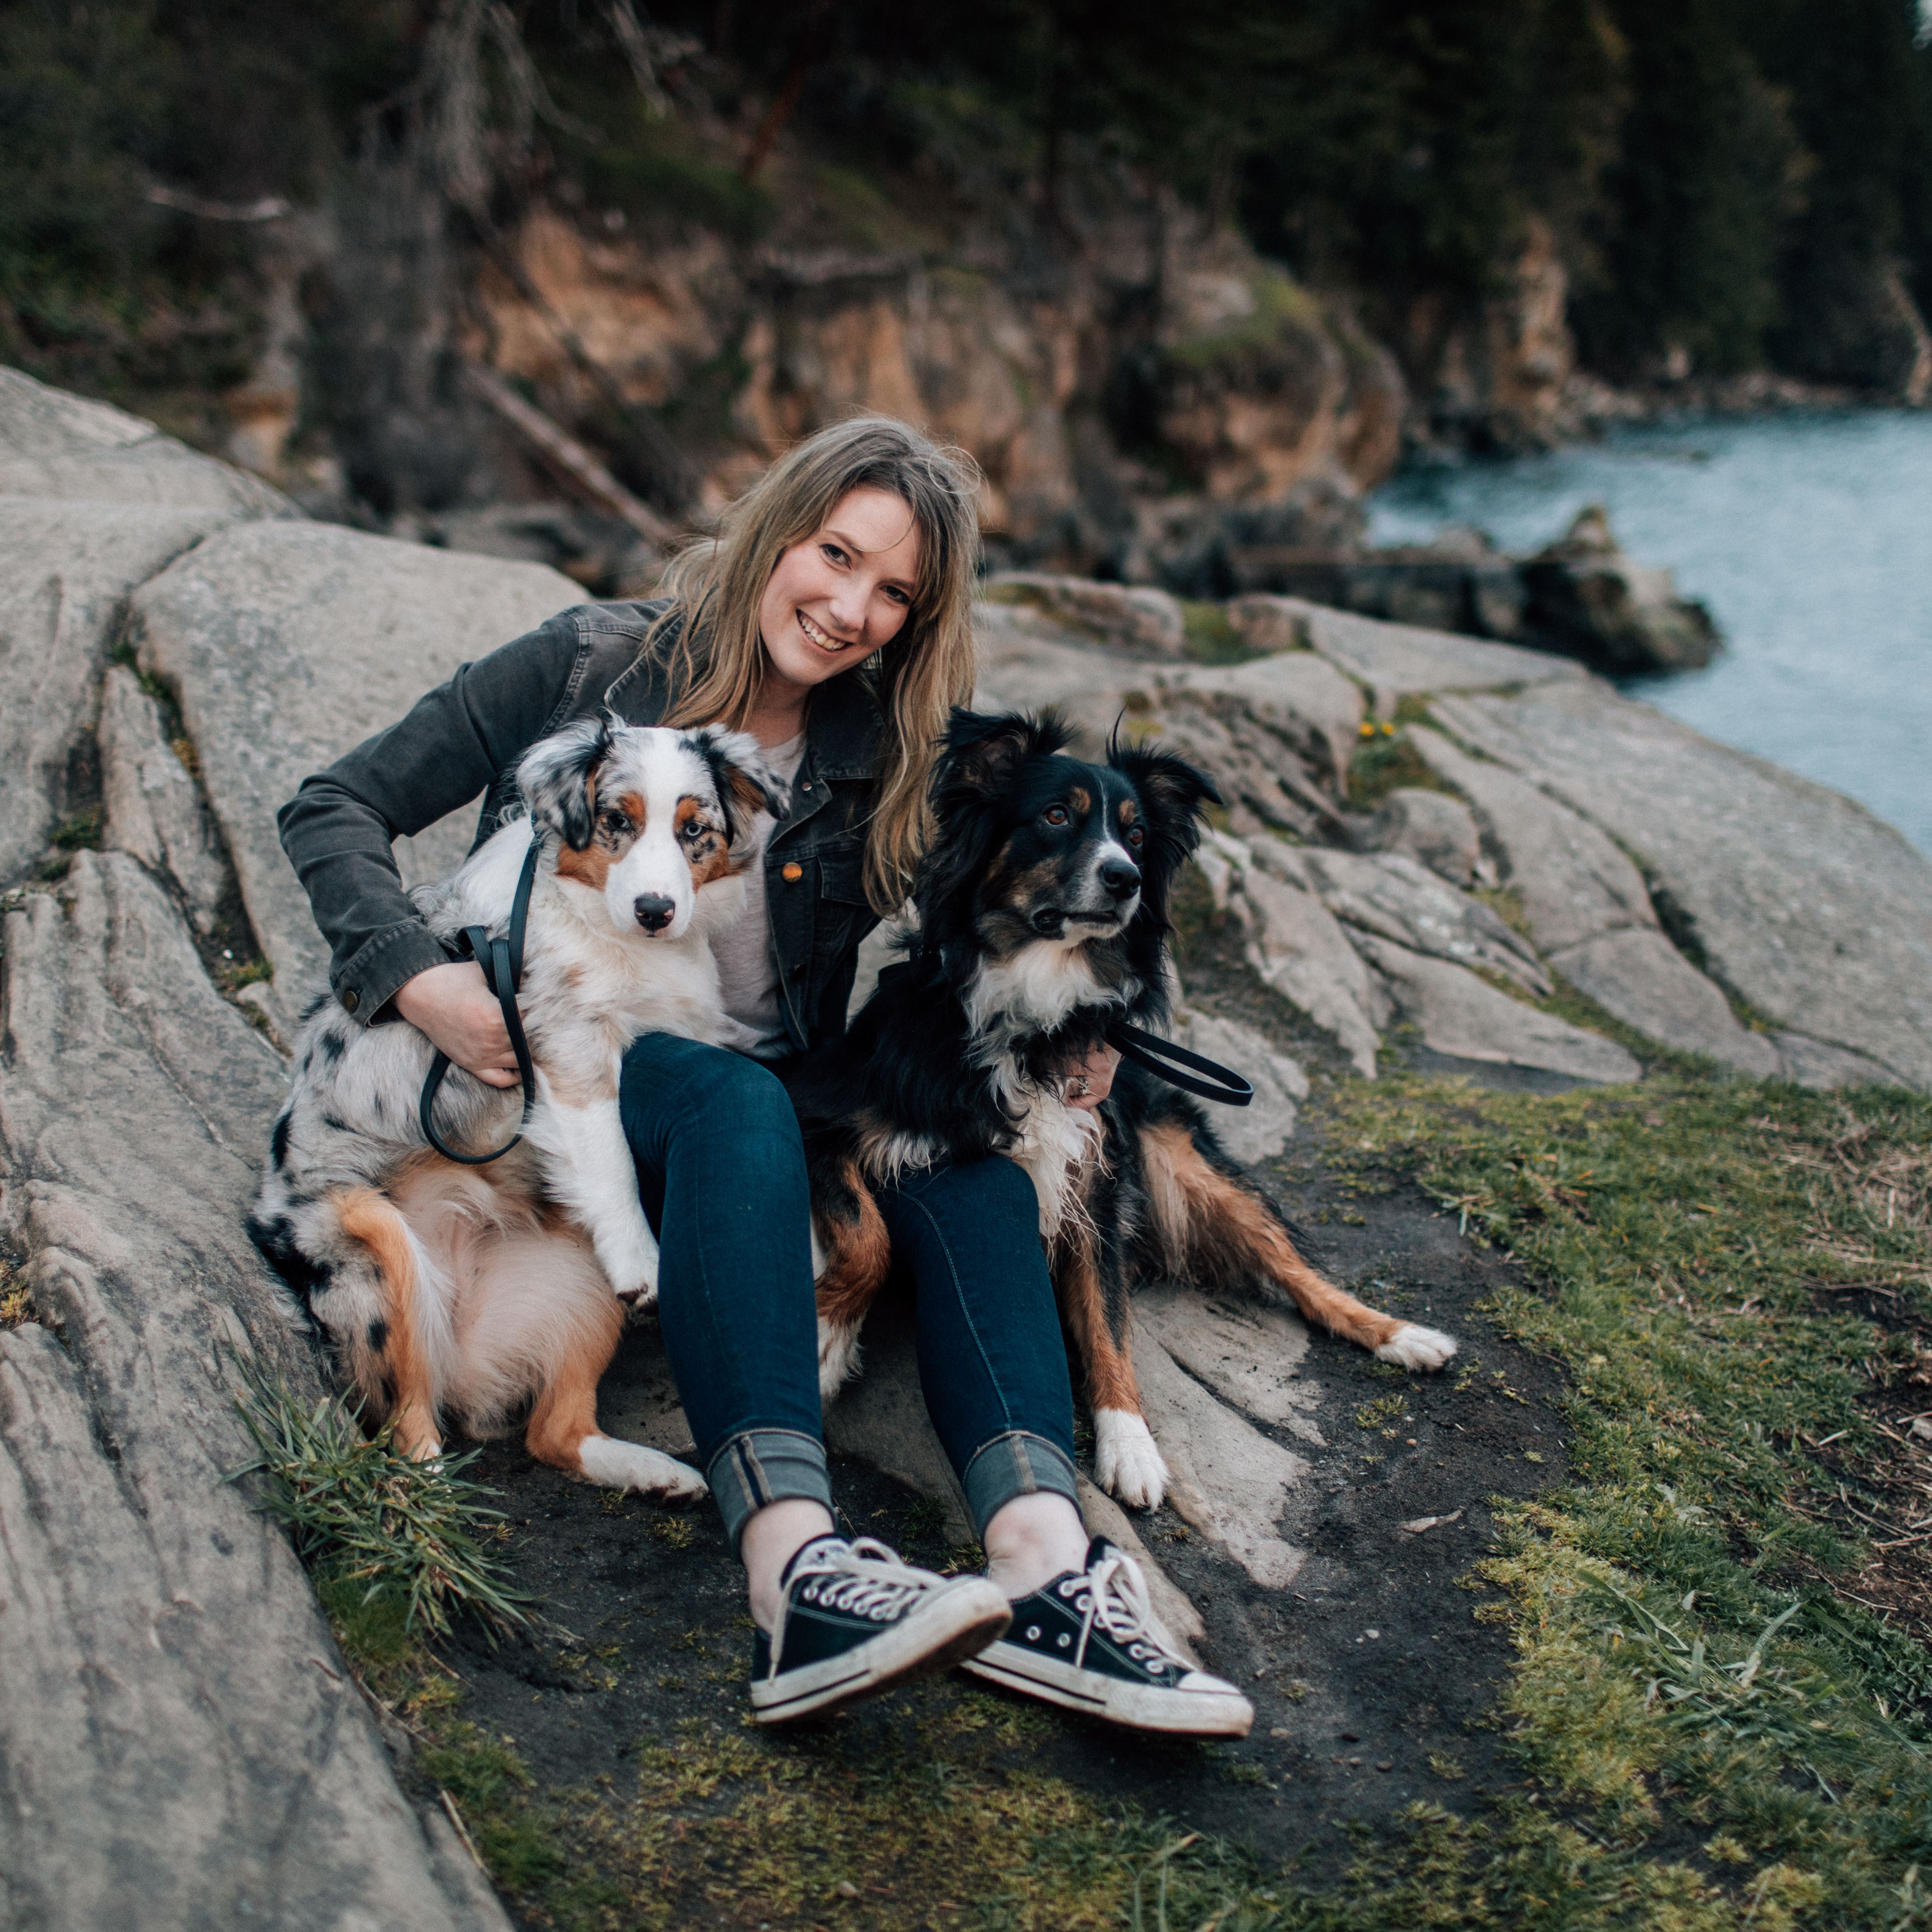 courtney sitting and hugging her two fluffy dogs on the coastline with the ocean in the background